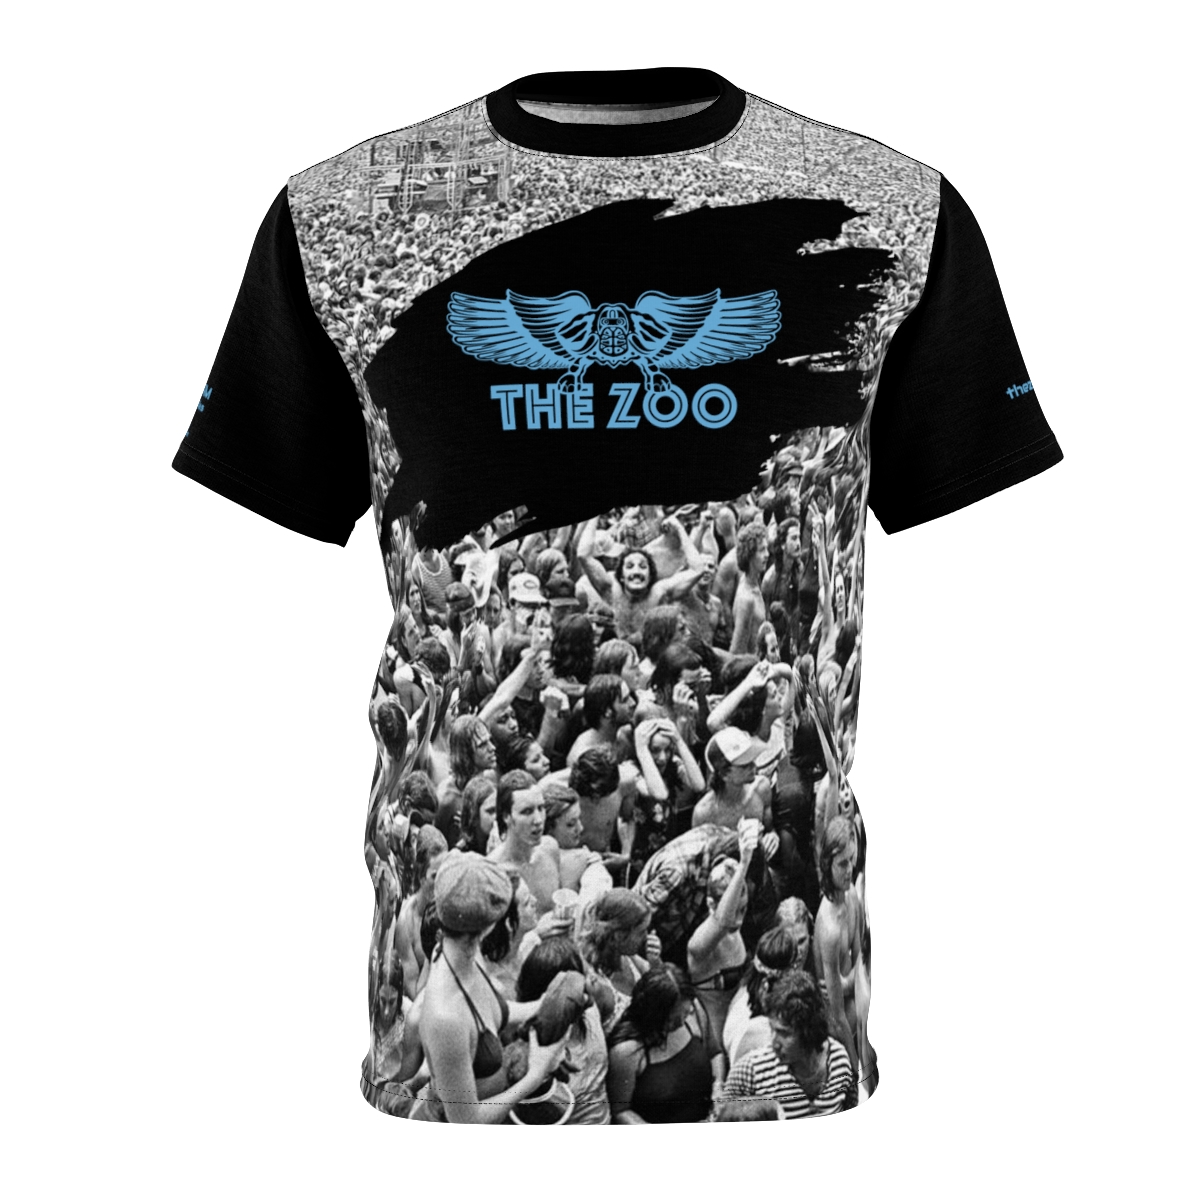 THE ZOO Texxas Jam Crowd Shirt (LIMITED EDITION) product thumbnail image